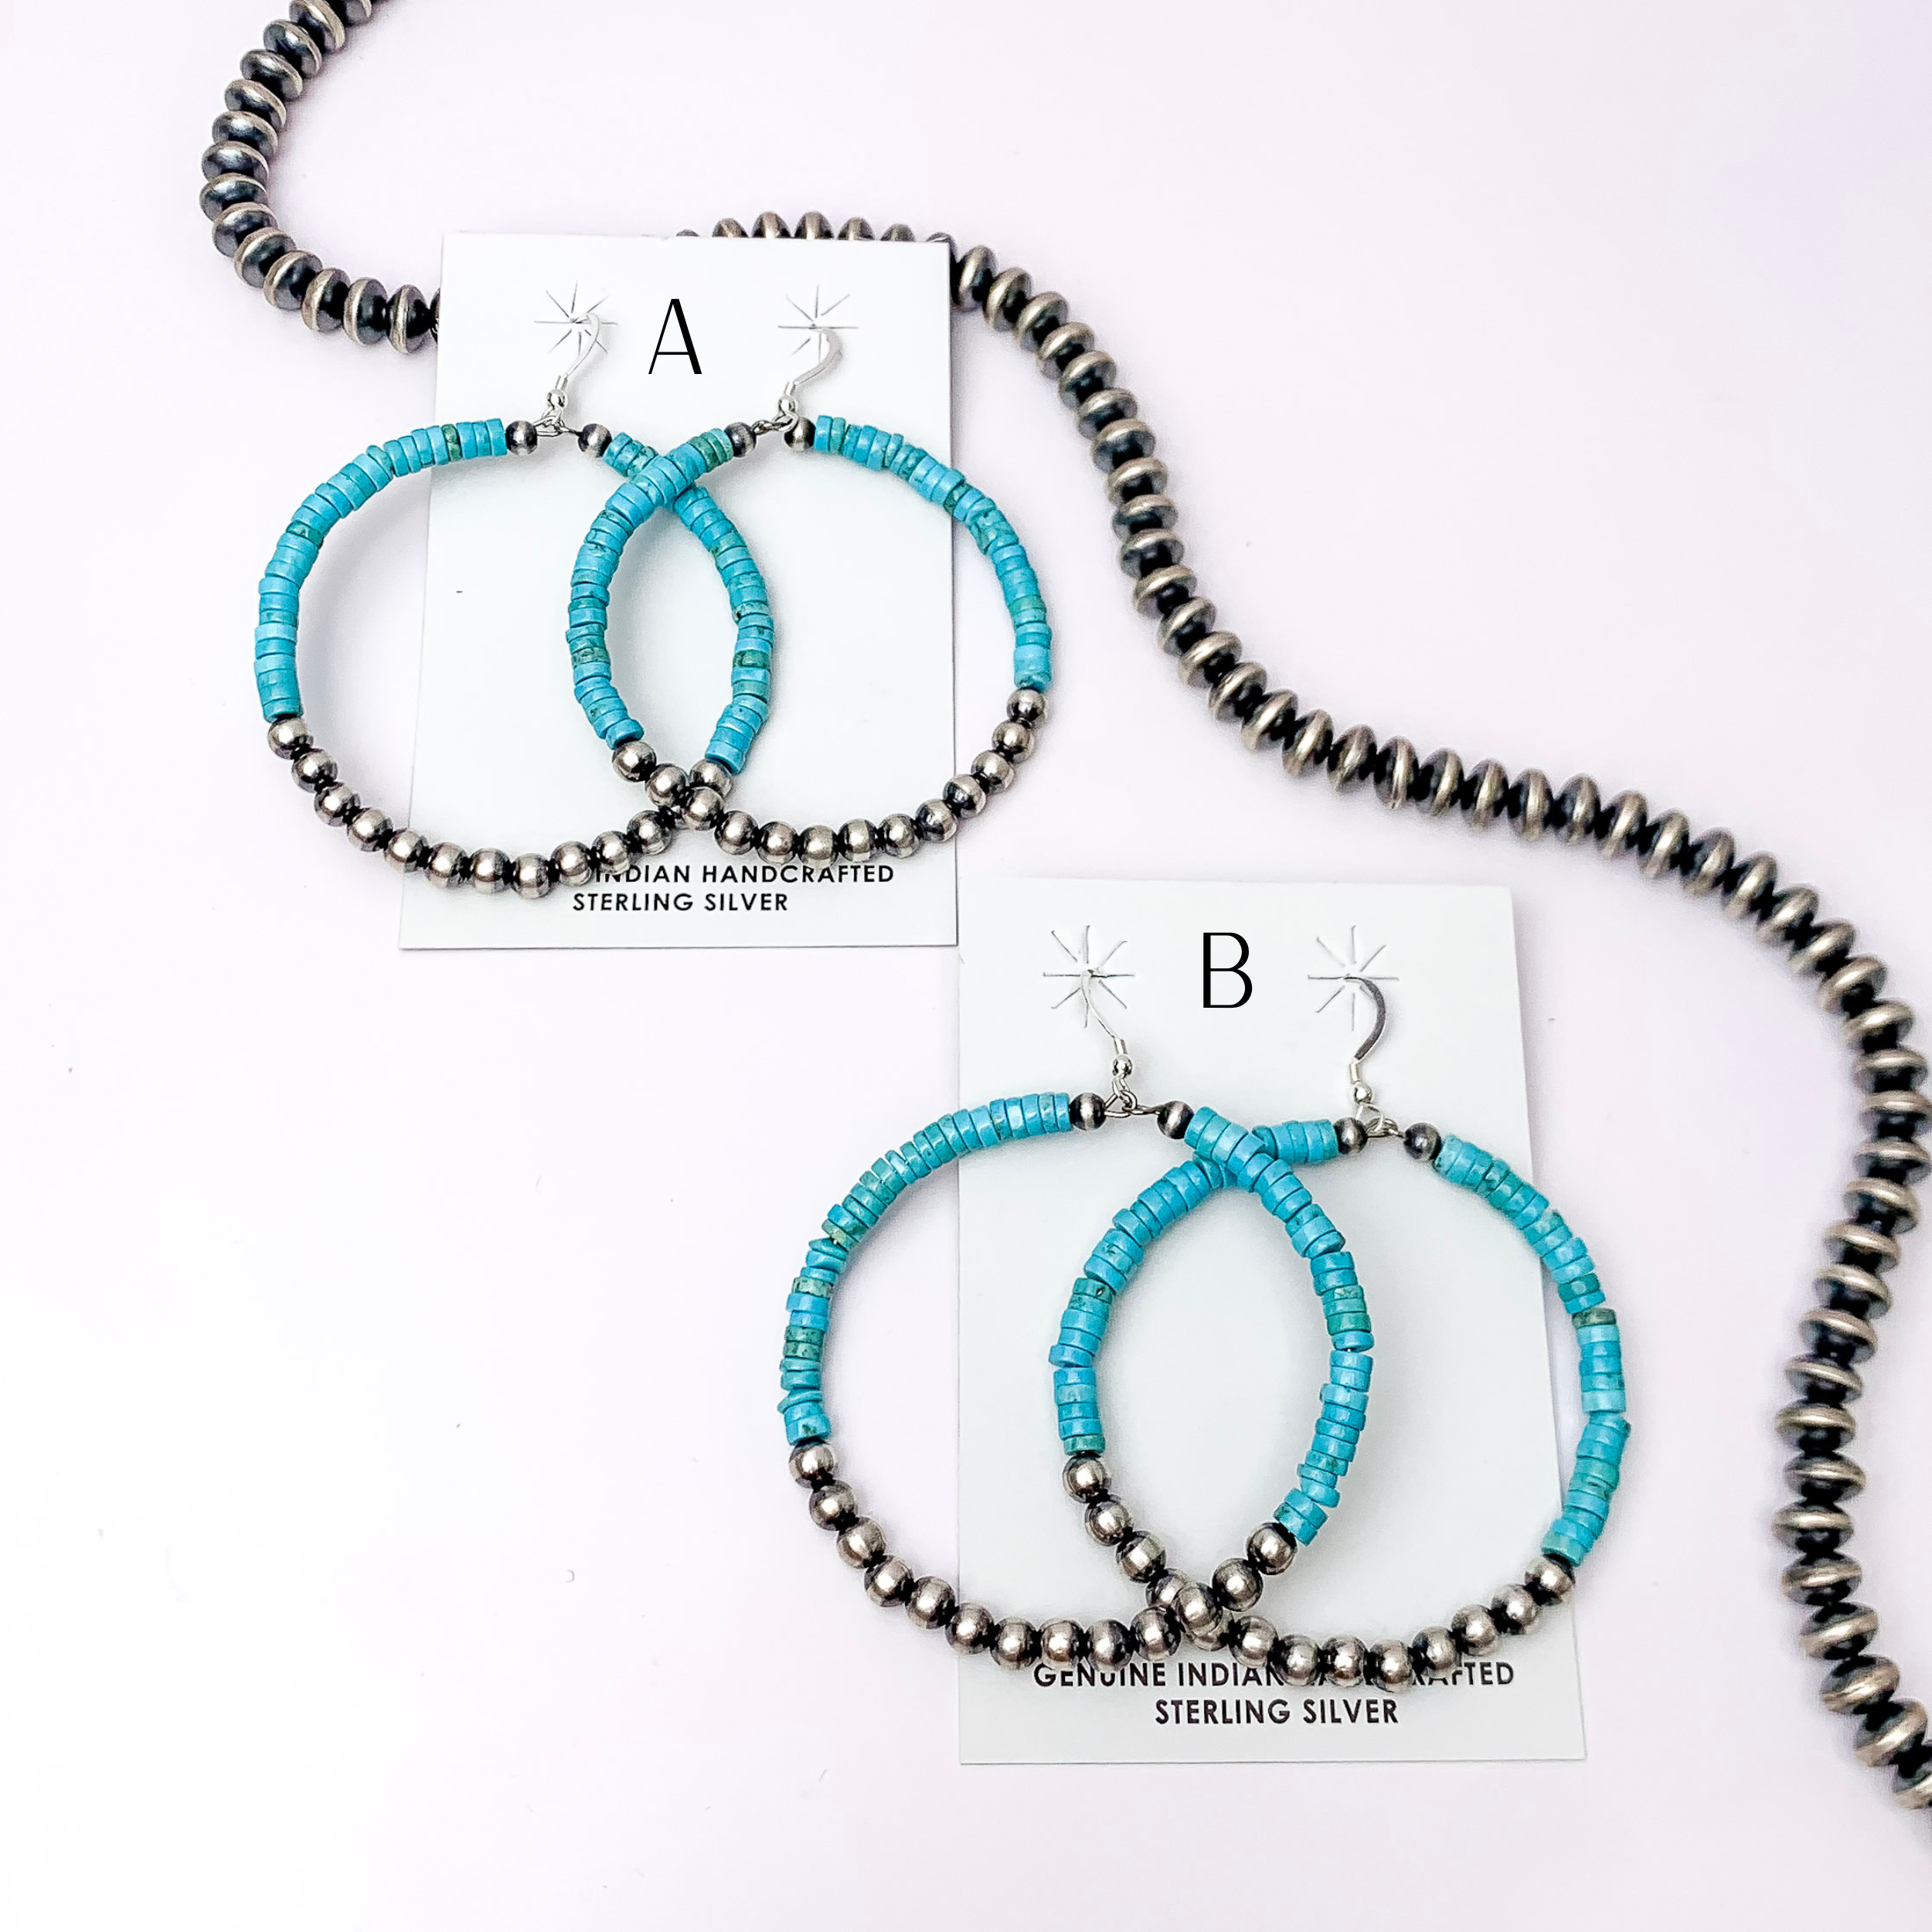 Navajo | Navajo Handmade Sterling Silver Navajo Pearl Hoop Earrings with Turquoise Stones - Giddy Up Glamour Boutique